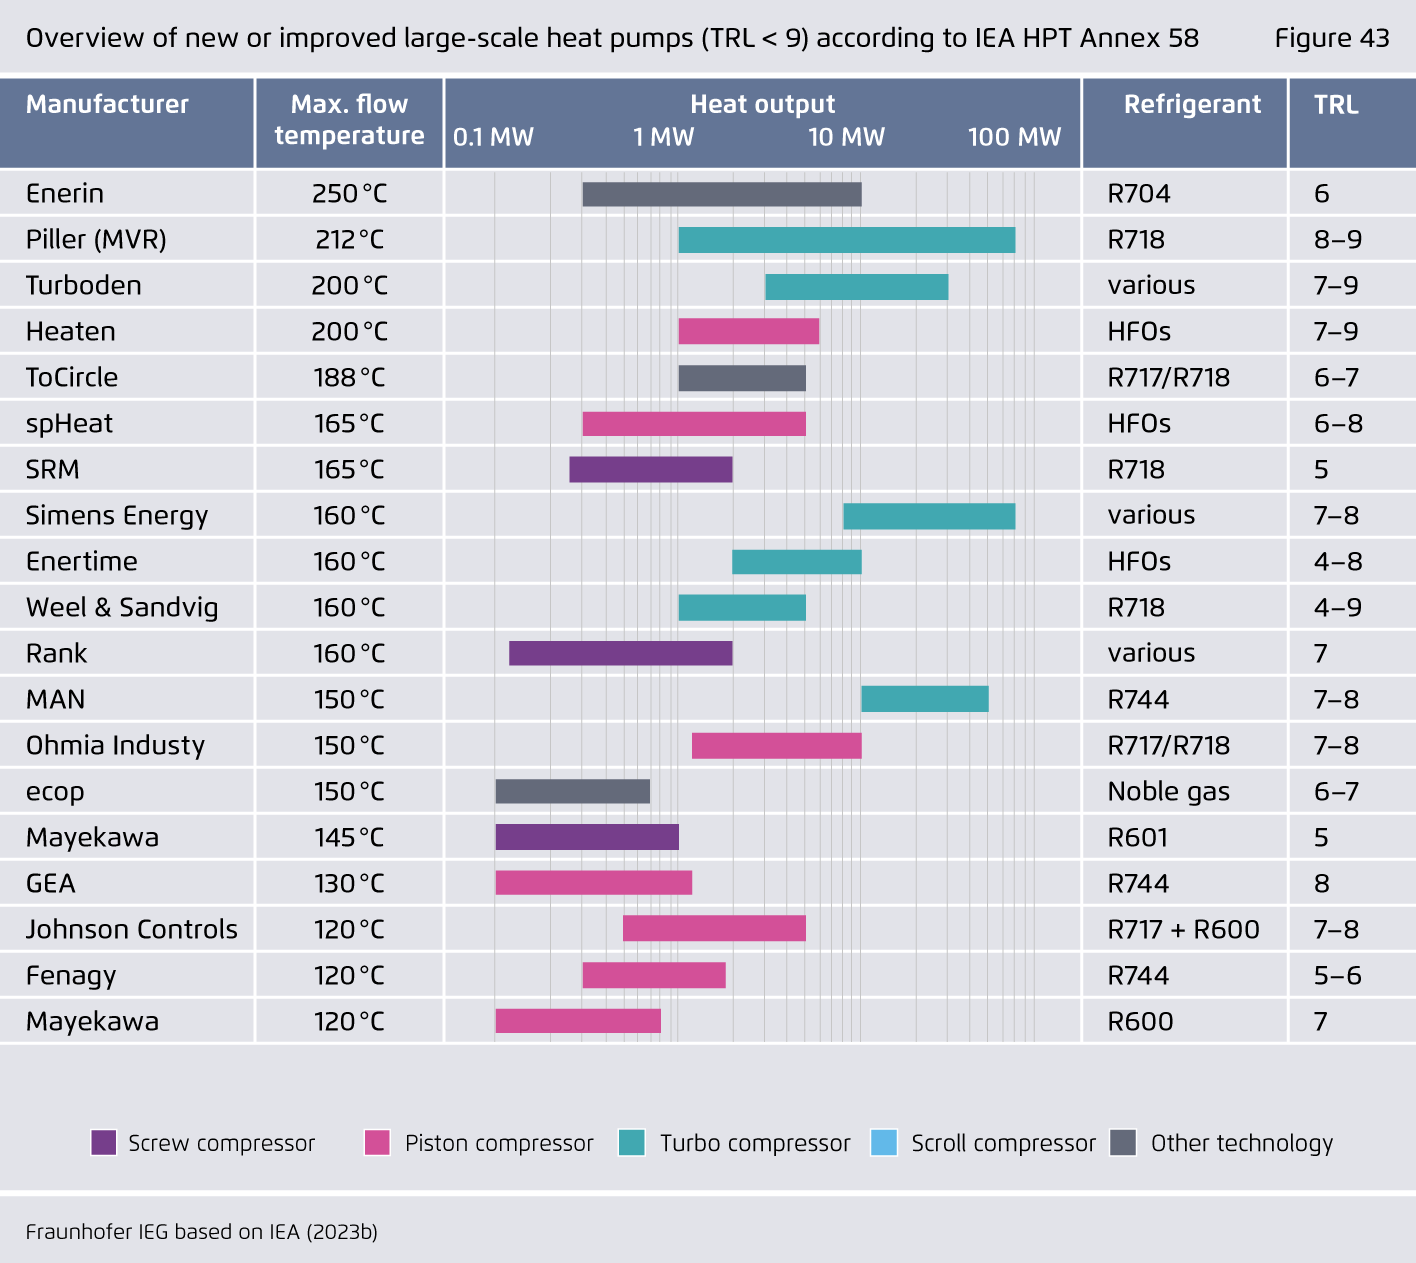 Preview for Overview of new or improved large-scale heat pumps (TRL < 9) according to IEA HPT Annex 58